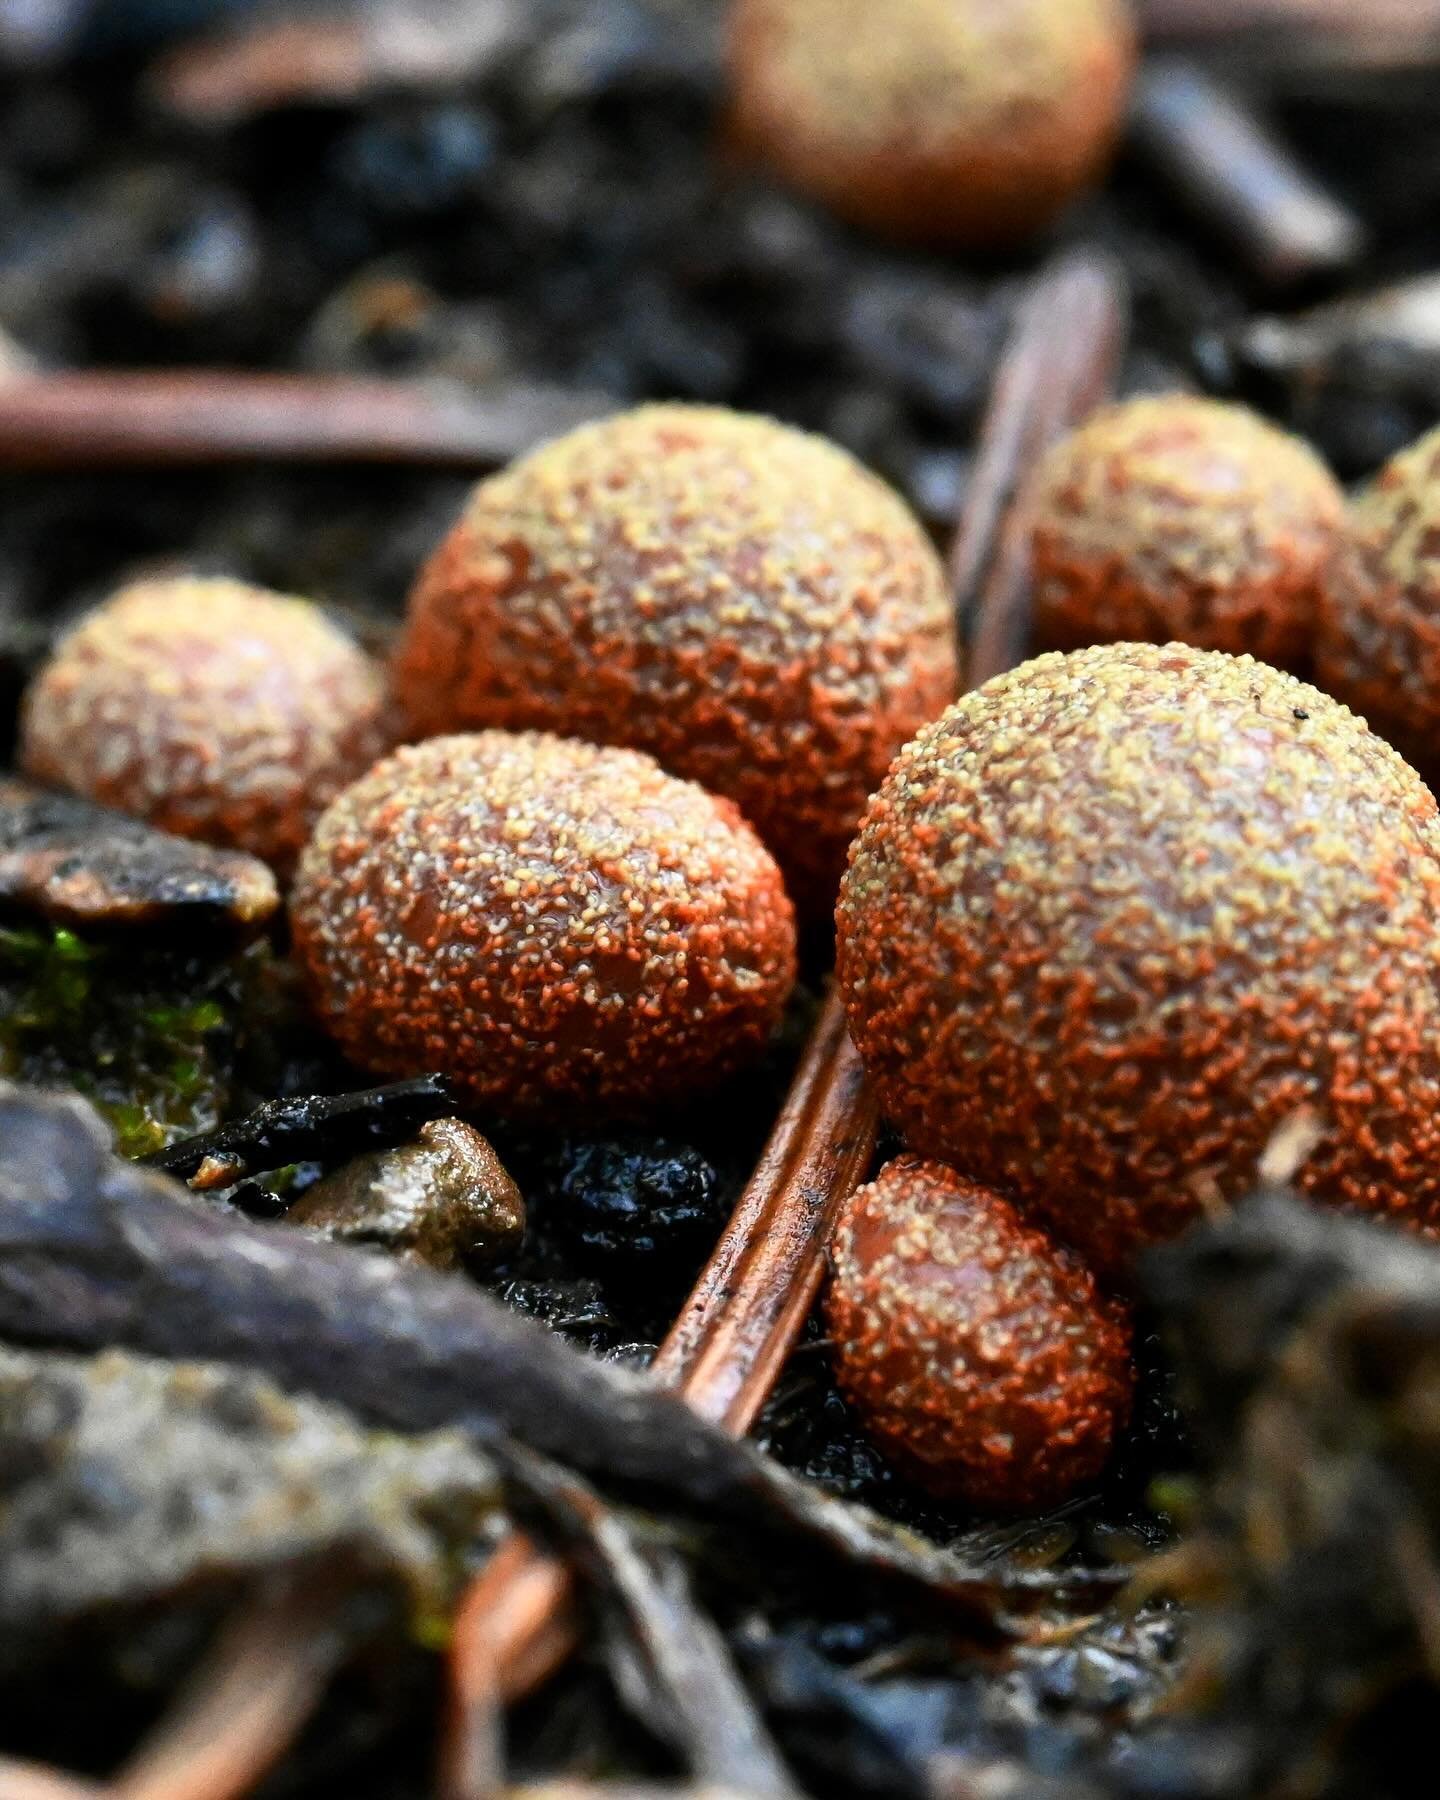 Spotted in the garden - Wolf's Milk slime mold [Lycogala epidendrum] So bright and blobular, like squishy little alien eggs hat also happen to support soil health by aiding the decomposition of plant matter and recycling nutrients back into the soil.